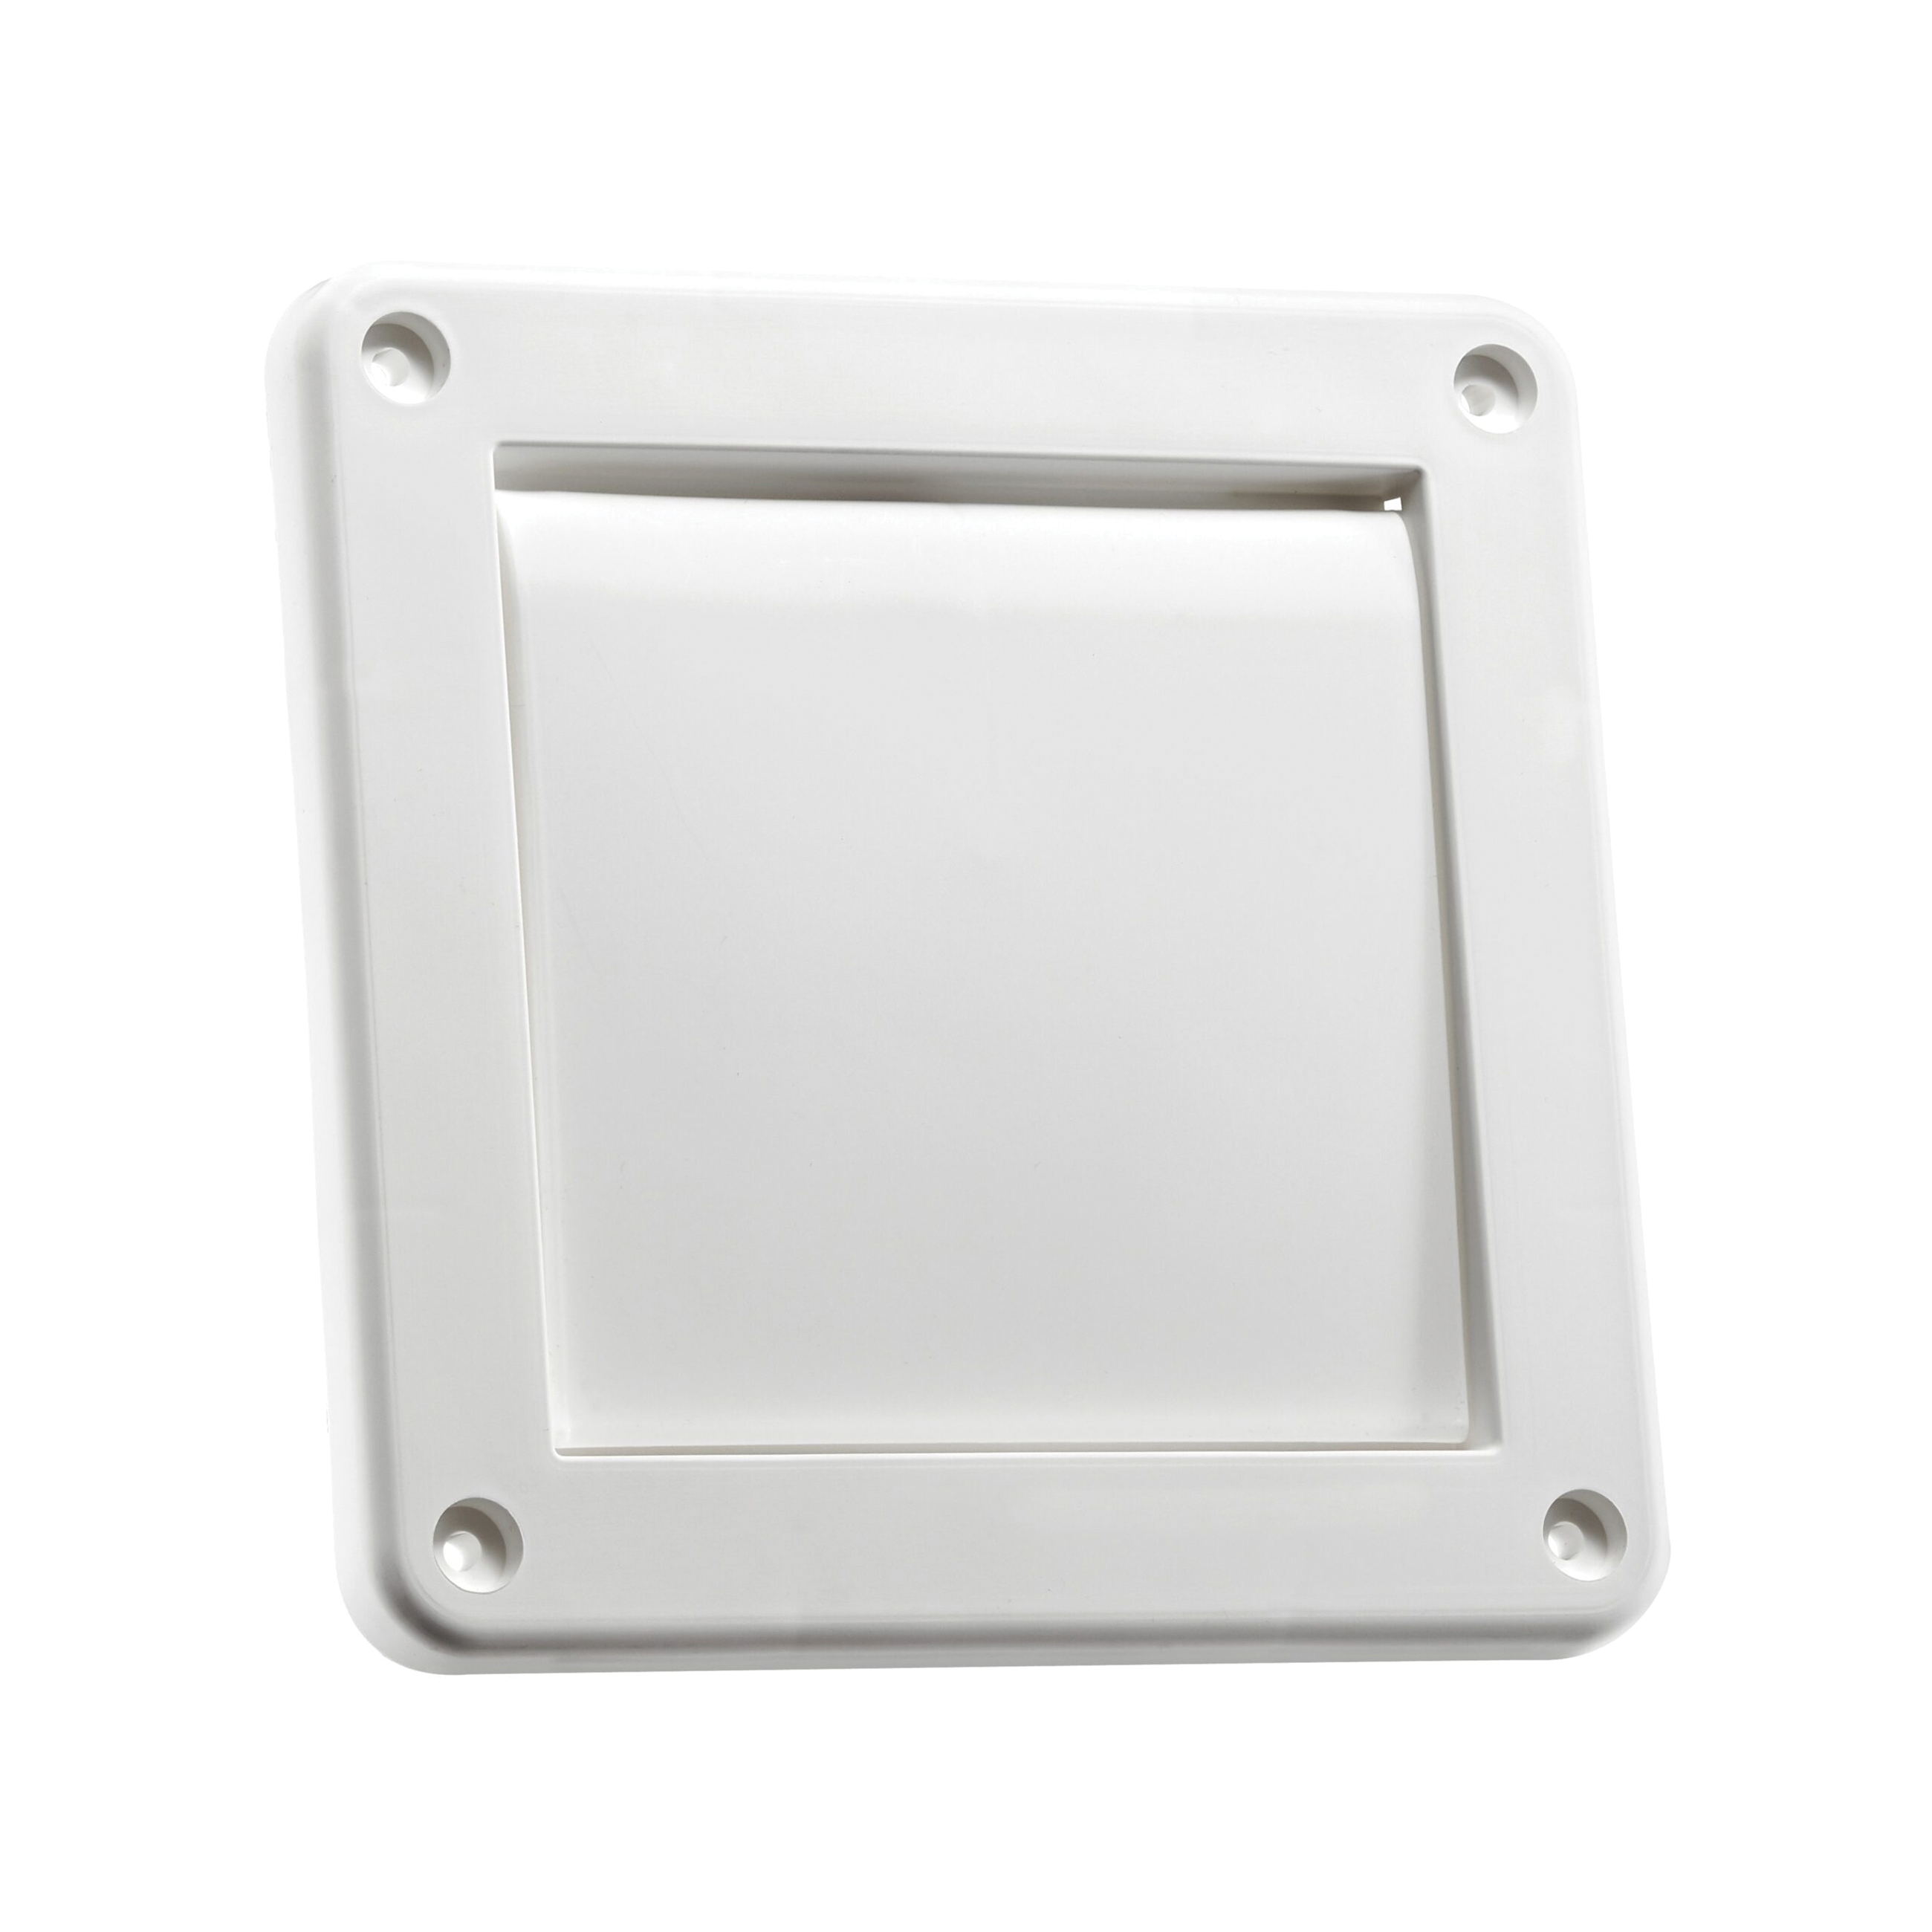 1422W Single-Flap Exhaust Vent, 4 in W, Plastic, White